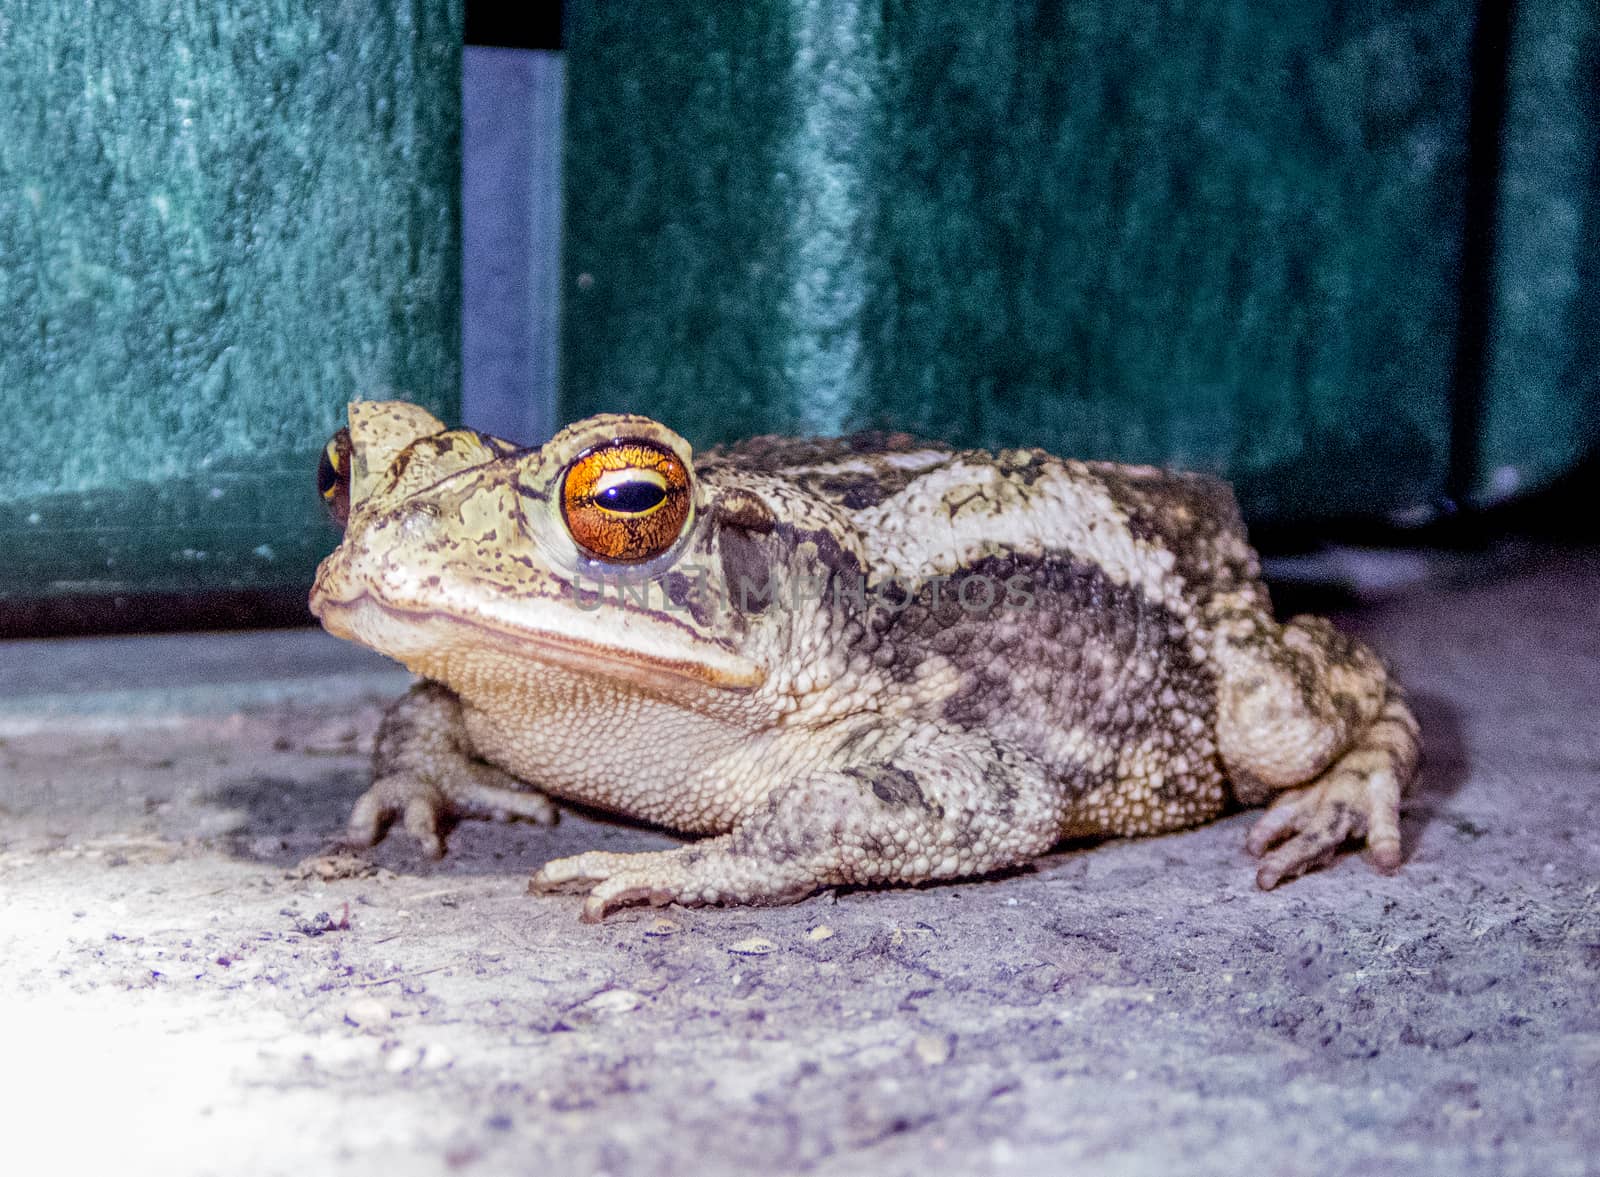 Texas Toad by thomas_males